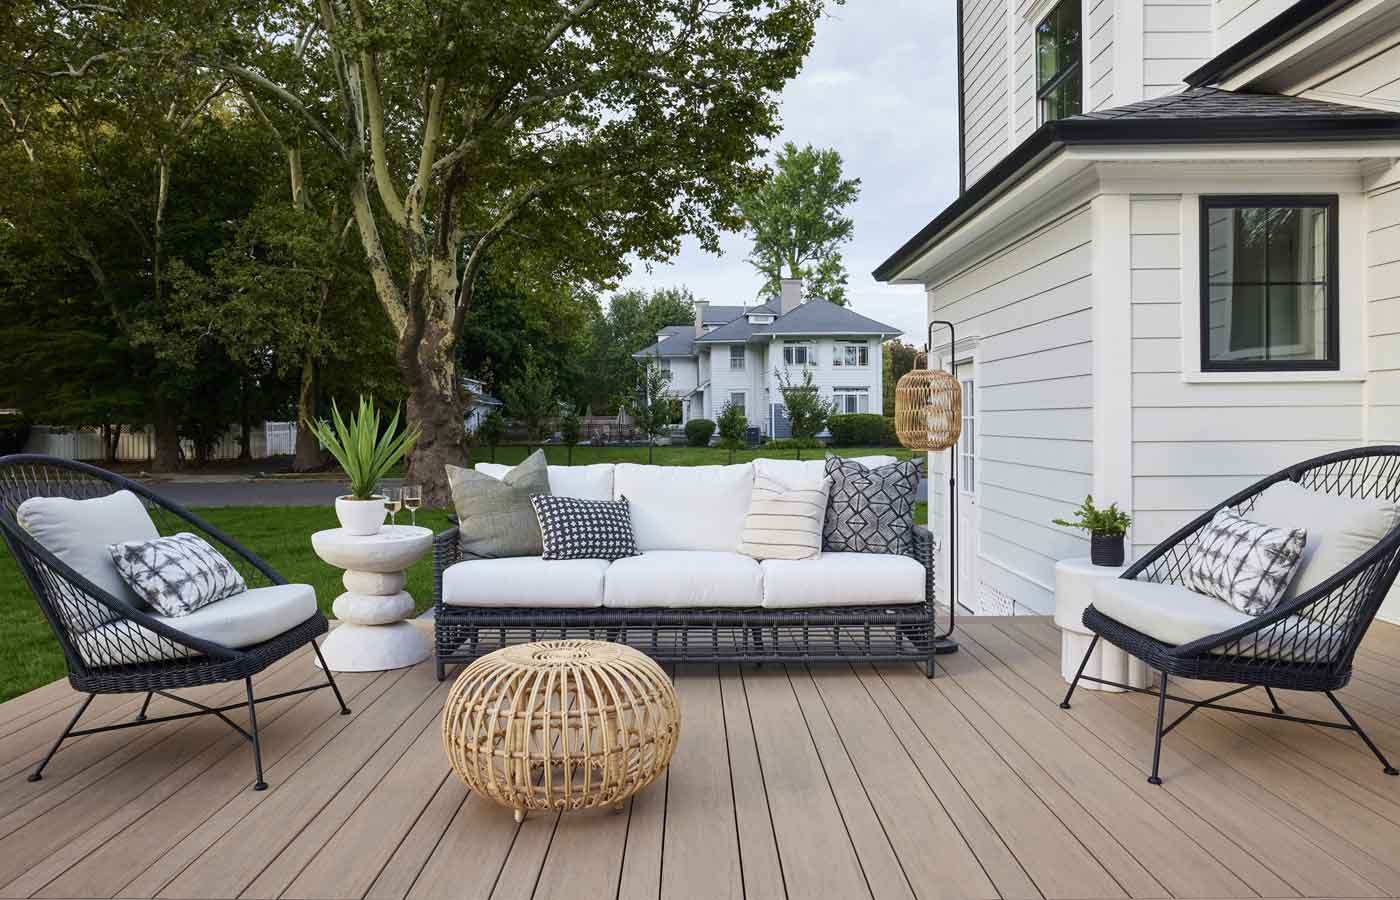 The Homeowners’ Guide to Deck Maintenance